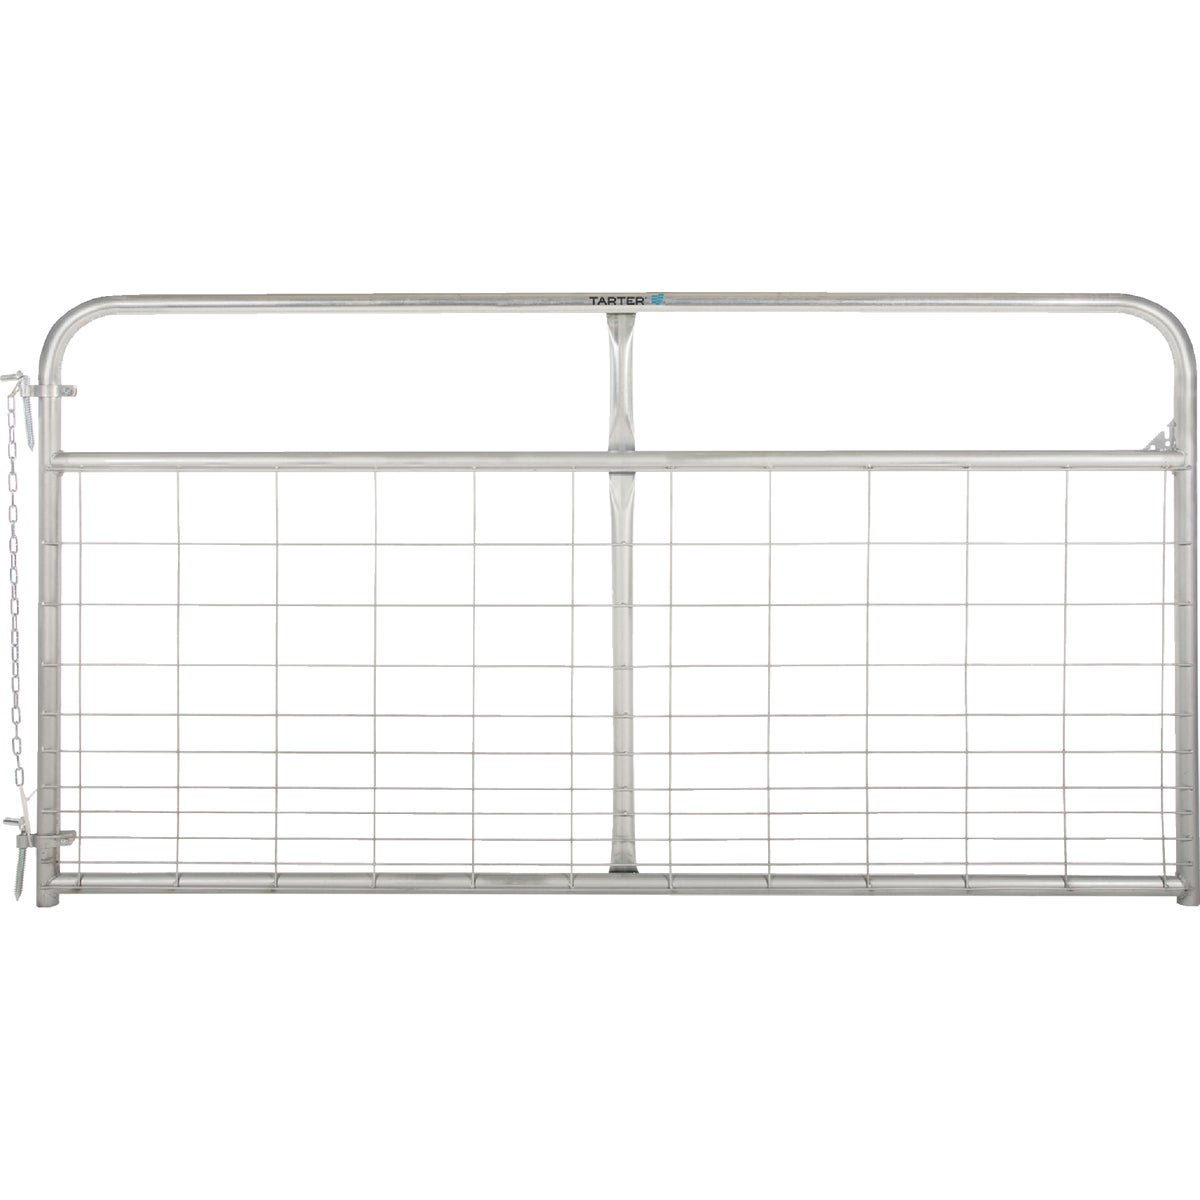 Item 761932, Ideal gate for confinement of hogs, sheep, or any small animal.